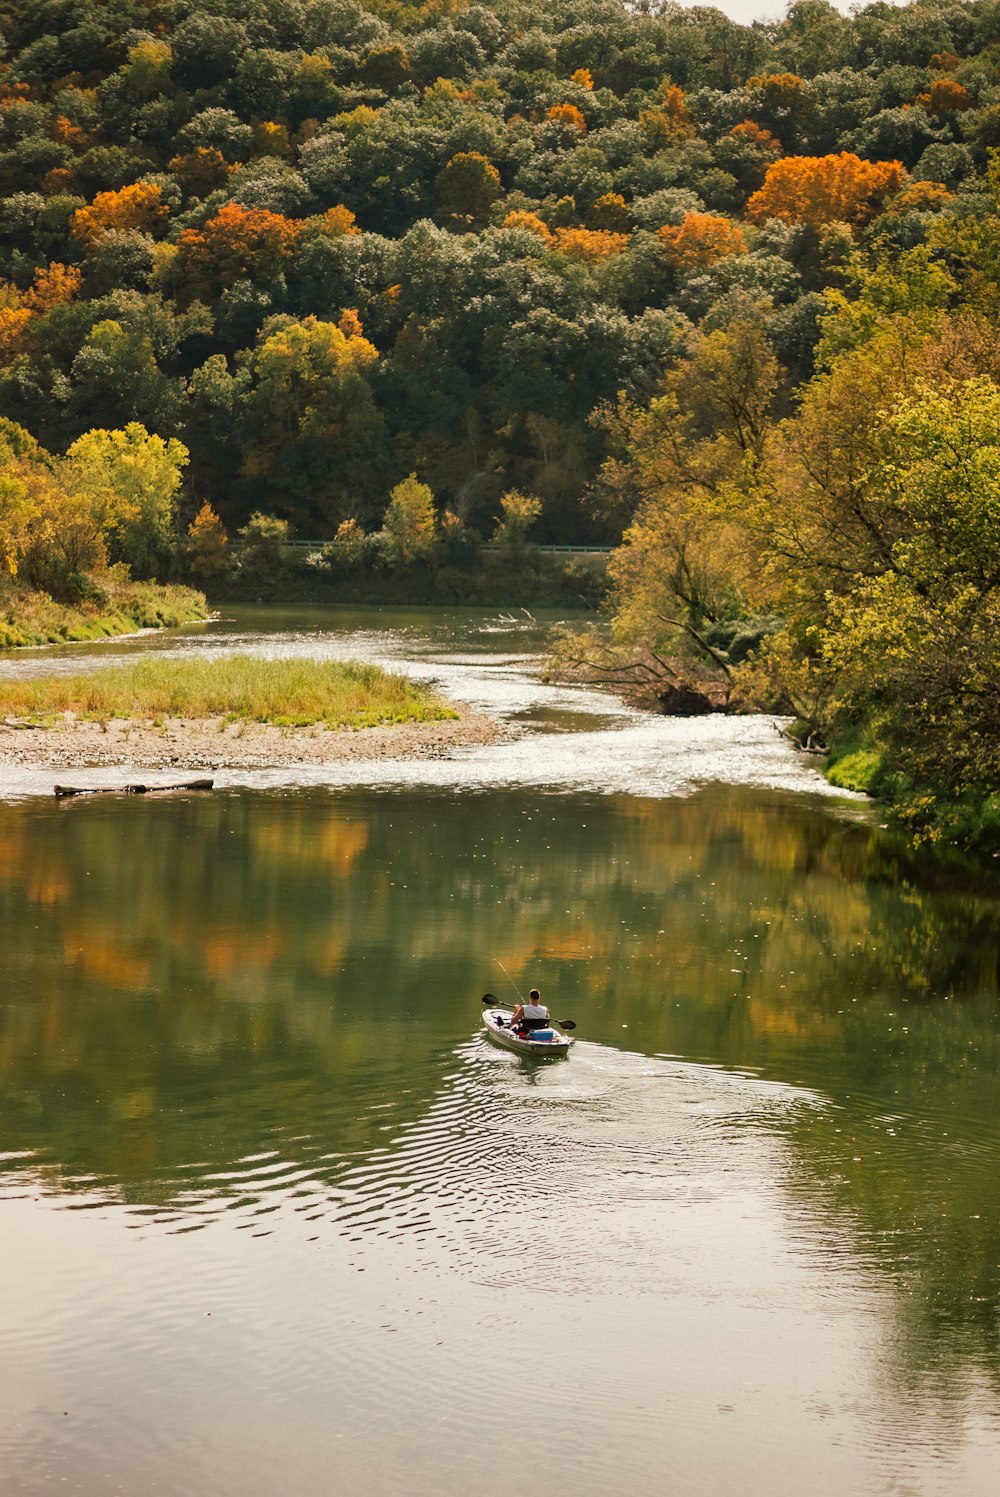 a person in a boat on a river surrounded by trees